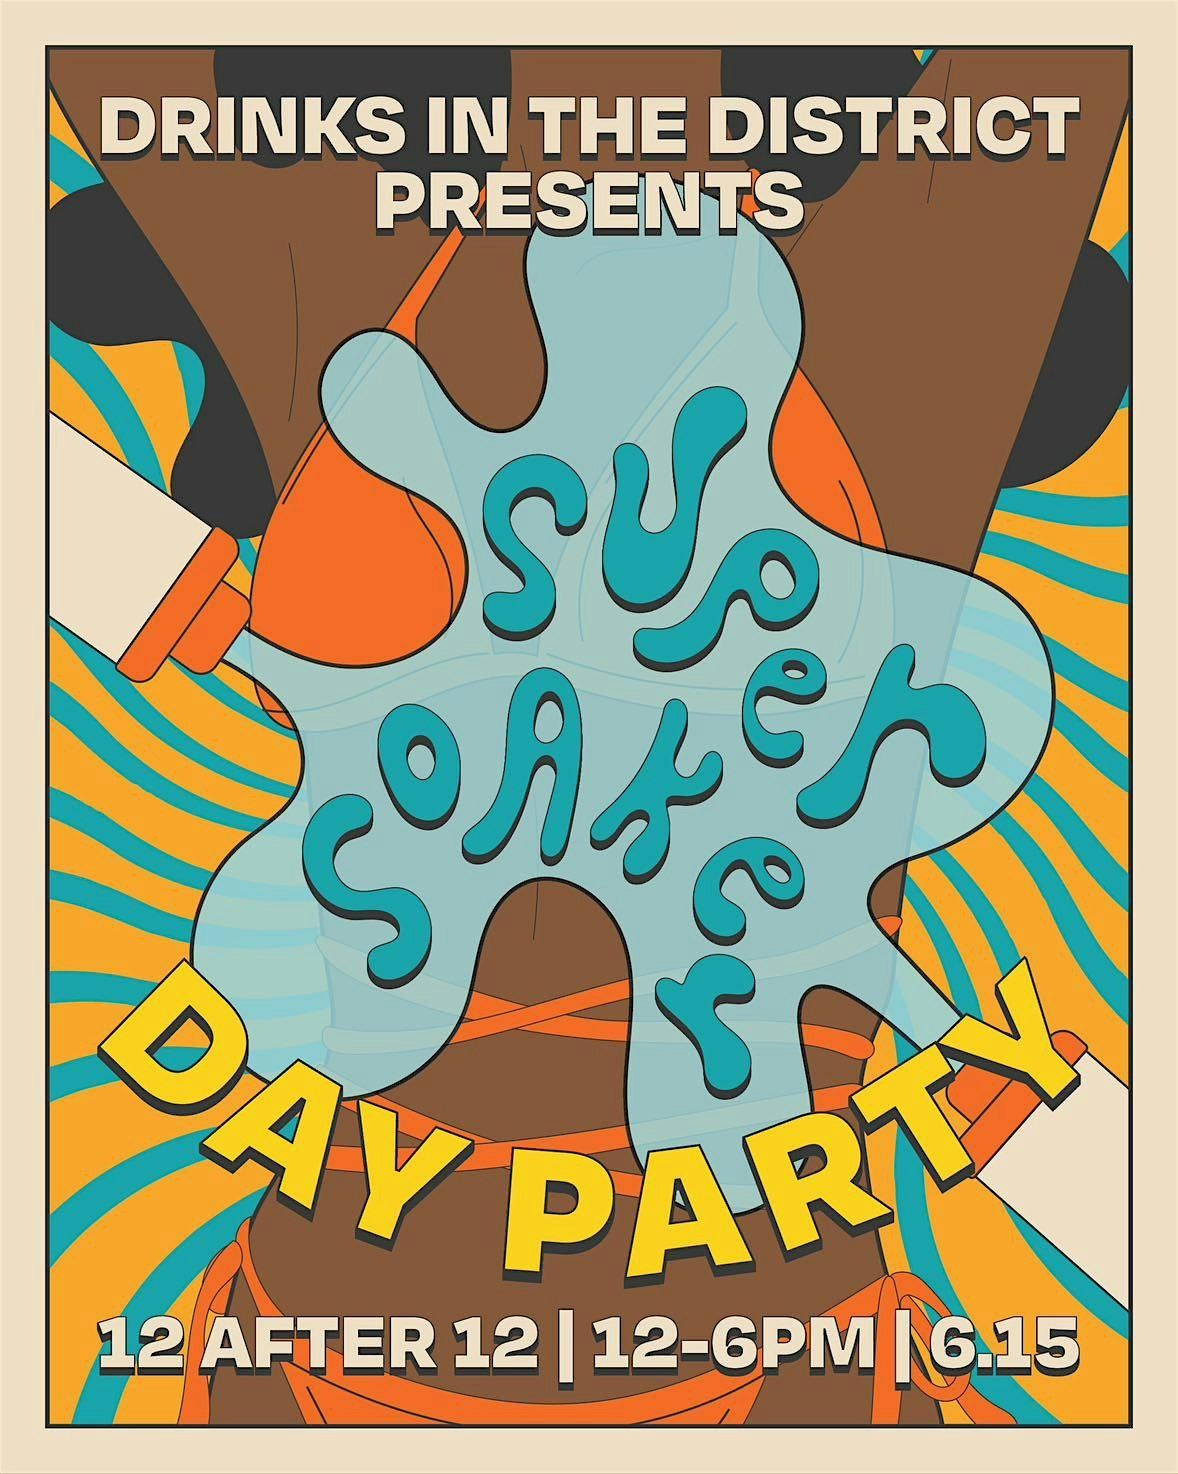 SUPER SOAKER: DC'S WETTEST DAY PARTY